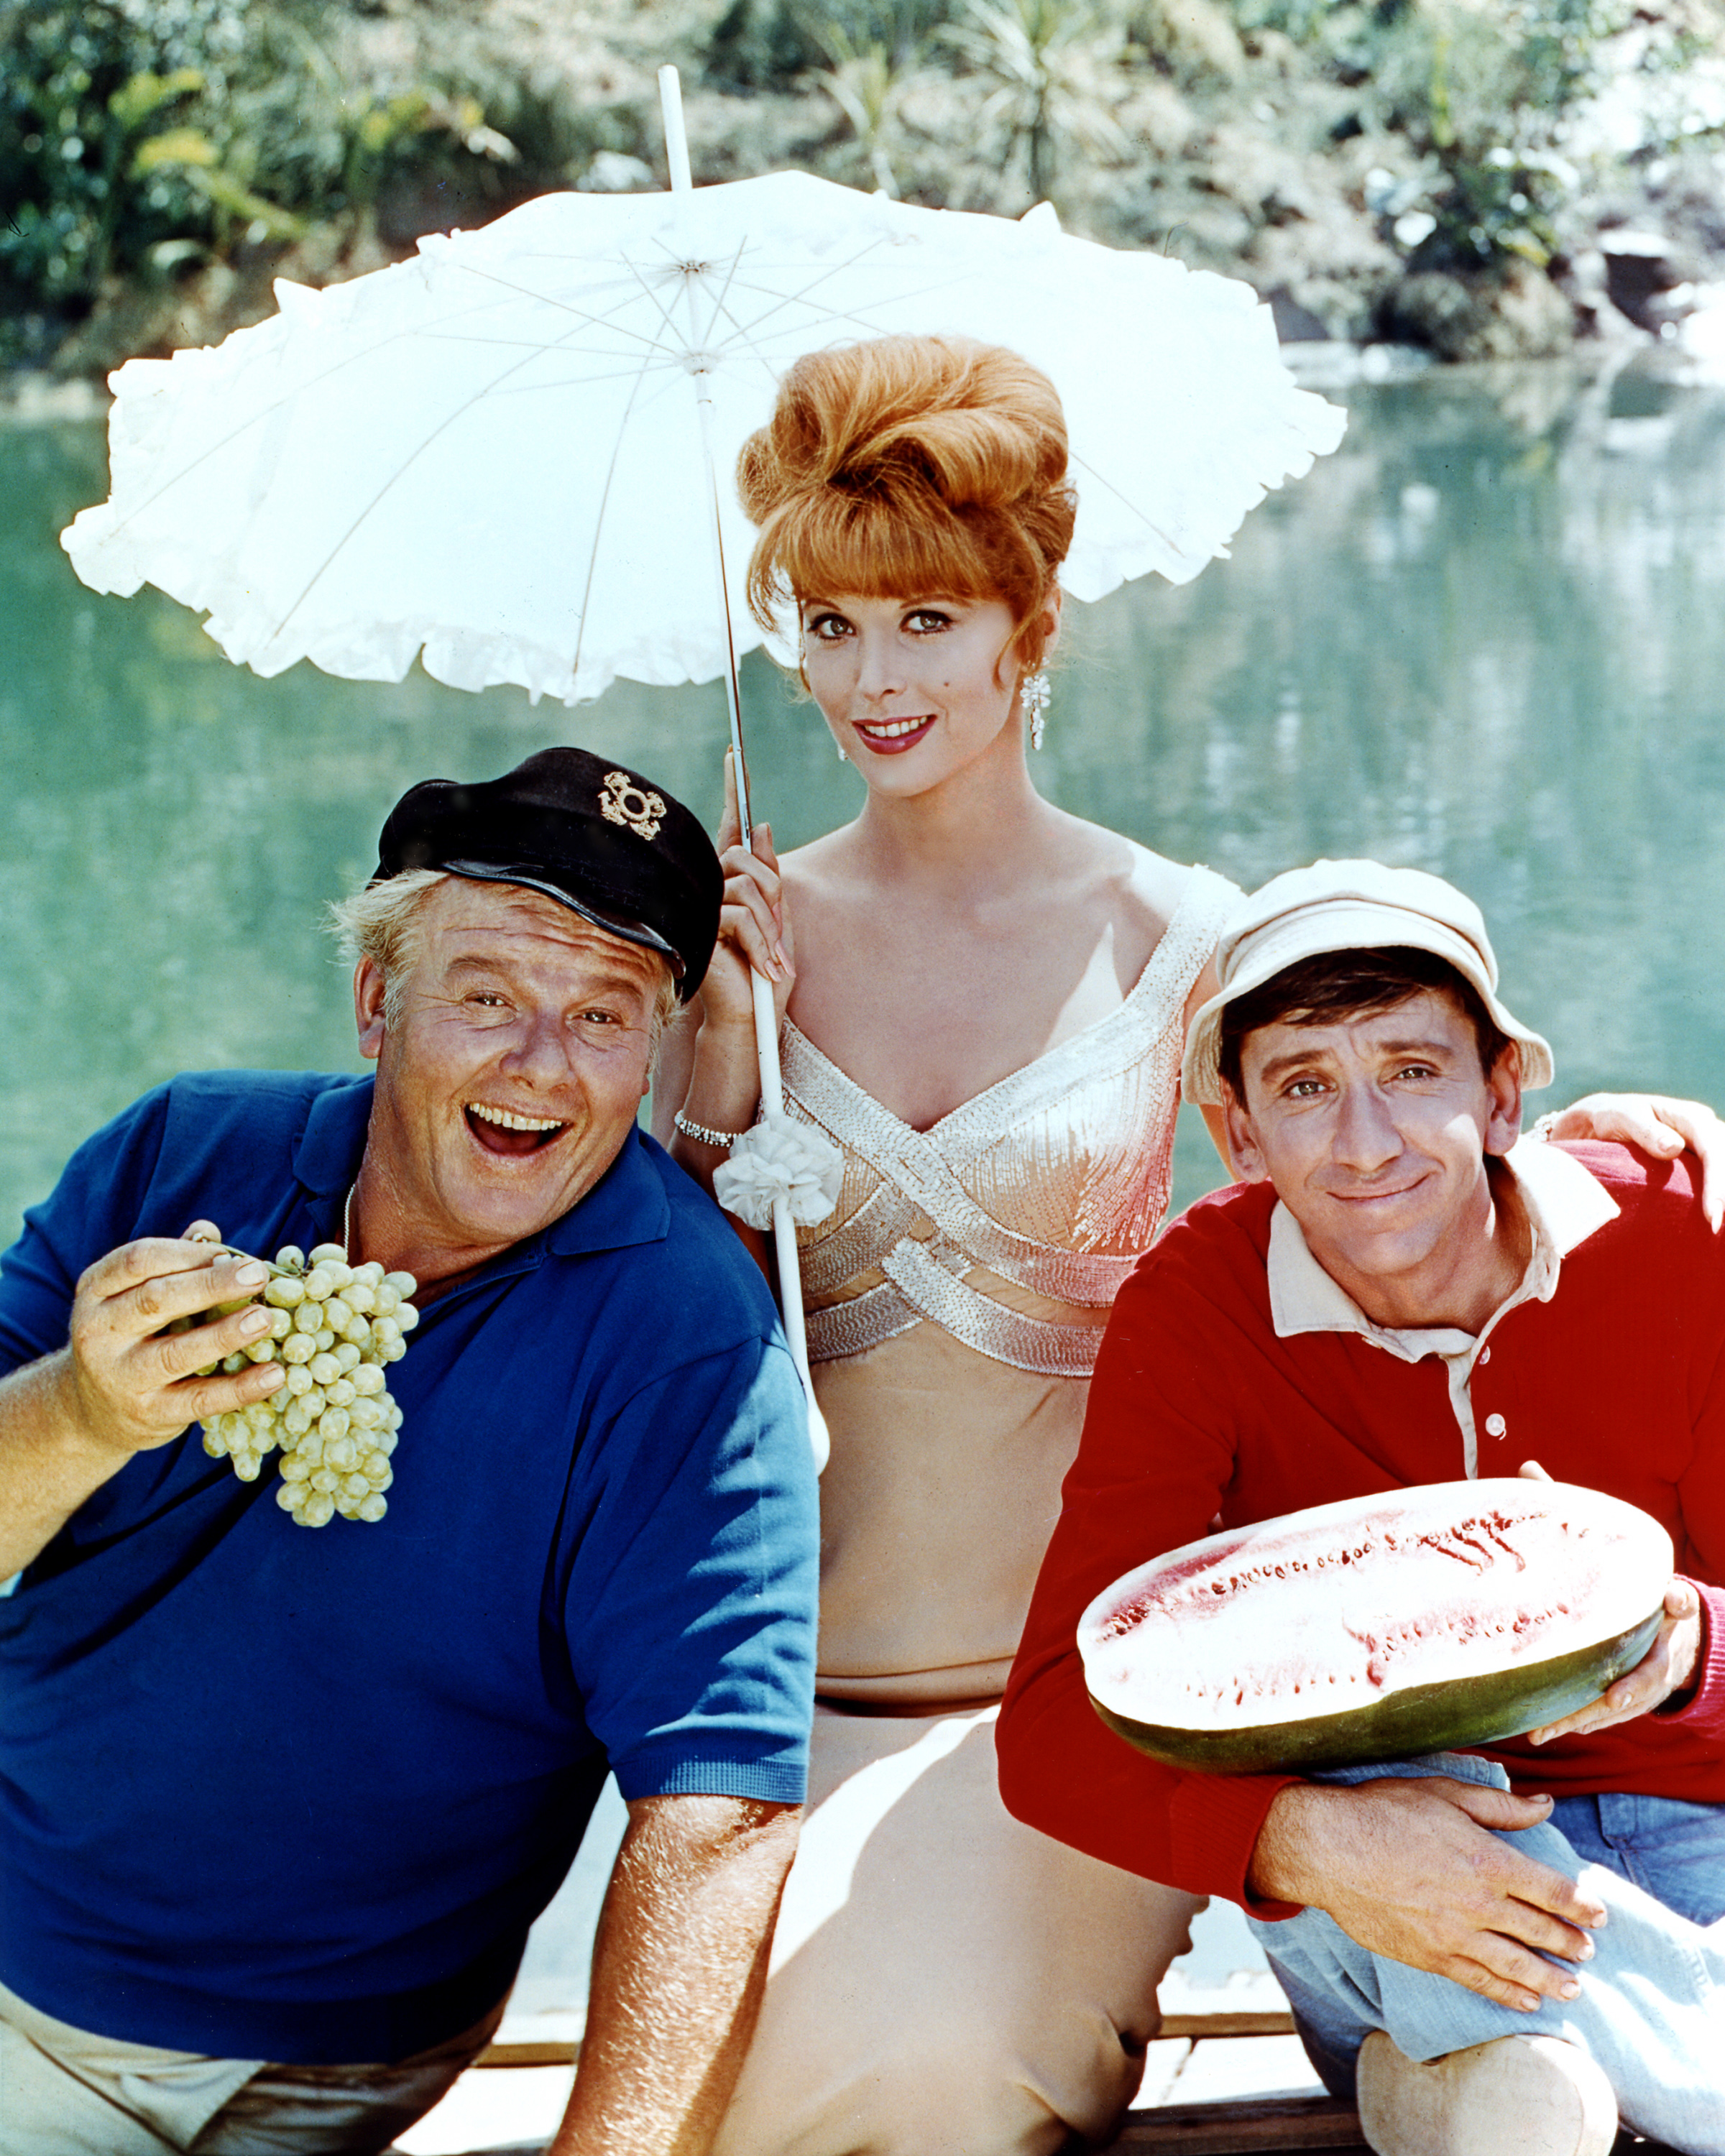 [L-R] Alan Hale Jr. (1921 - 1990) as The Skipper, Tina Louise as Ginger Grant and Bob Denver (1935 - 2005) as Gilligan in the television series 'Gilligan's Island', circa 1964. | Source: Getty Images